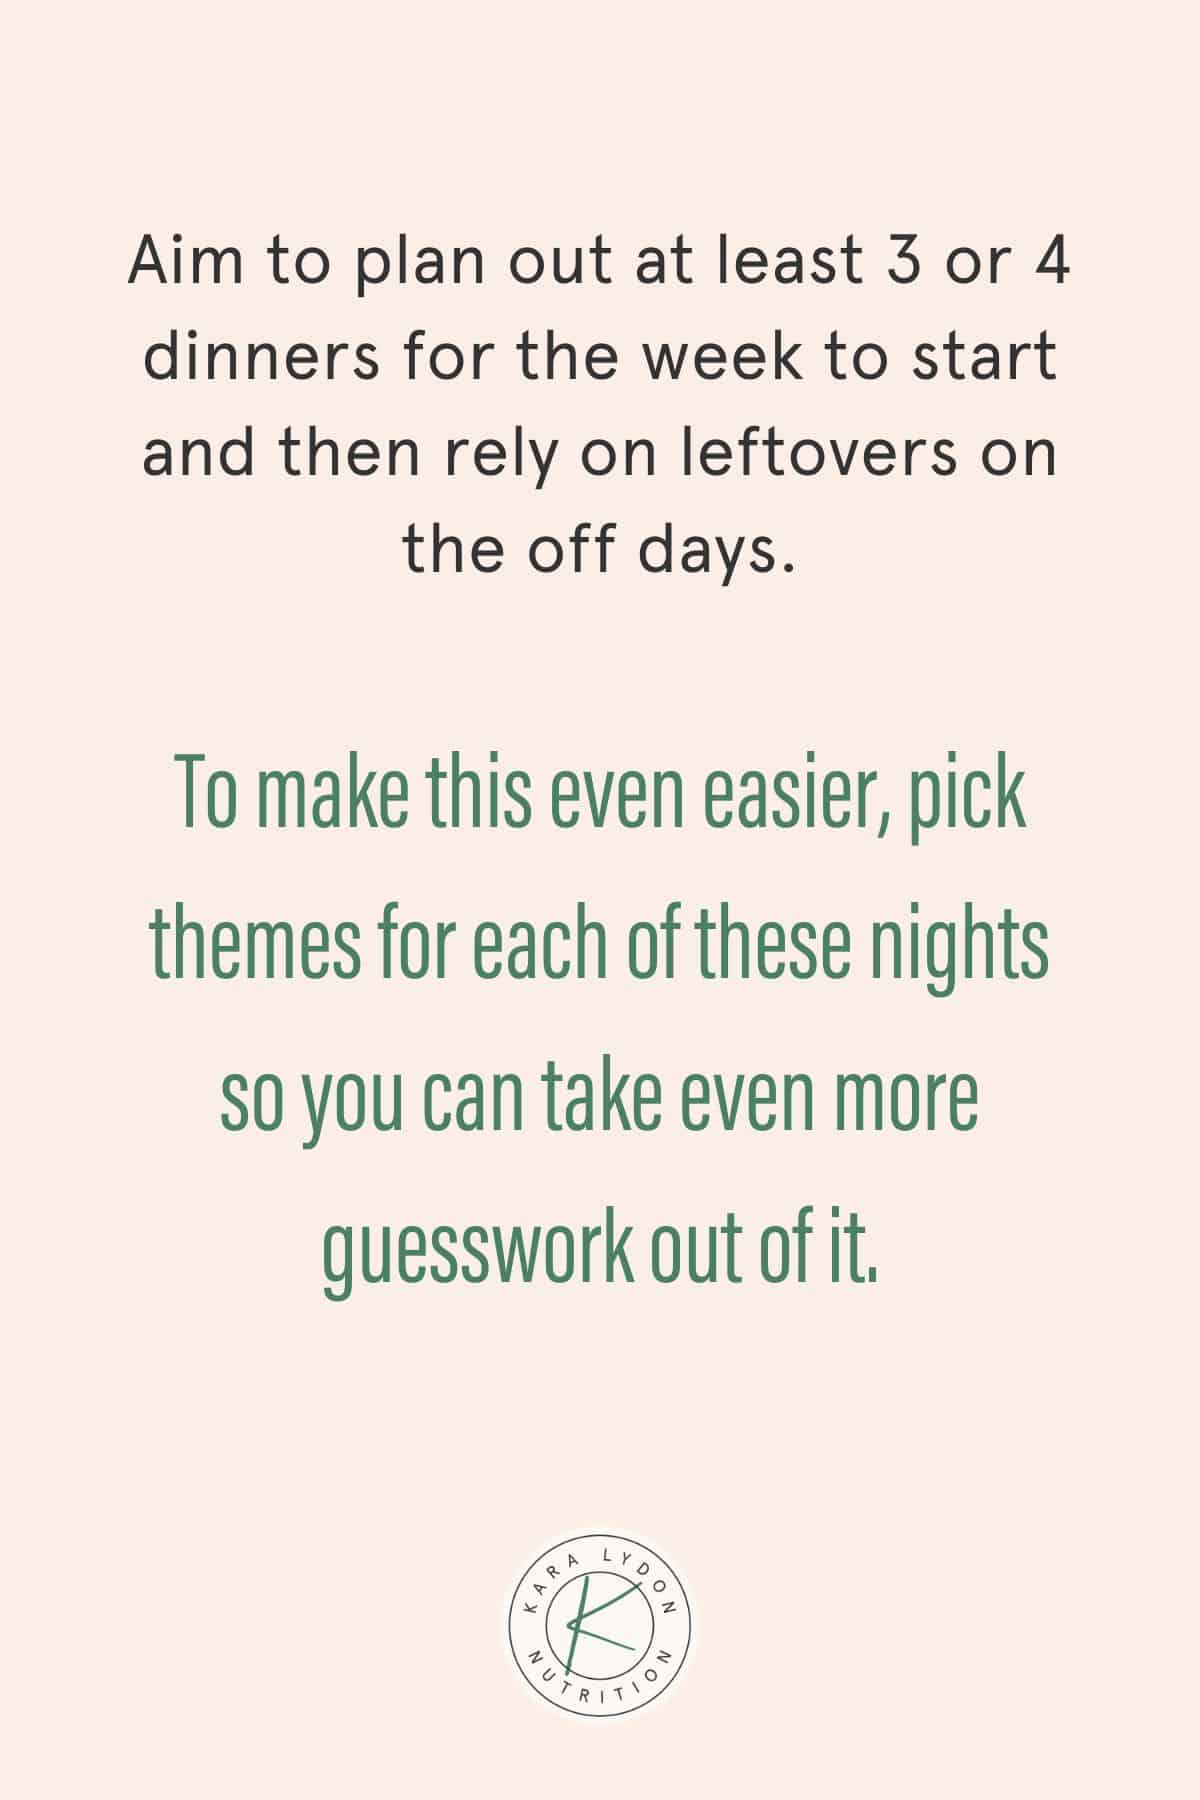 Graphic with quote: "Aim to plan out at least 3 or 4 dinners for the week to start and then rely on leftovers on the off days. To make this even easier, pick themes for each of these nights so you can take even more guesswork out of it."